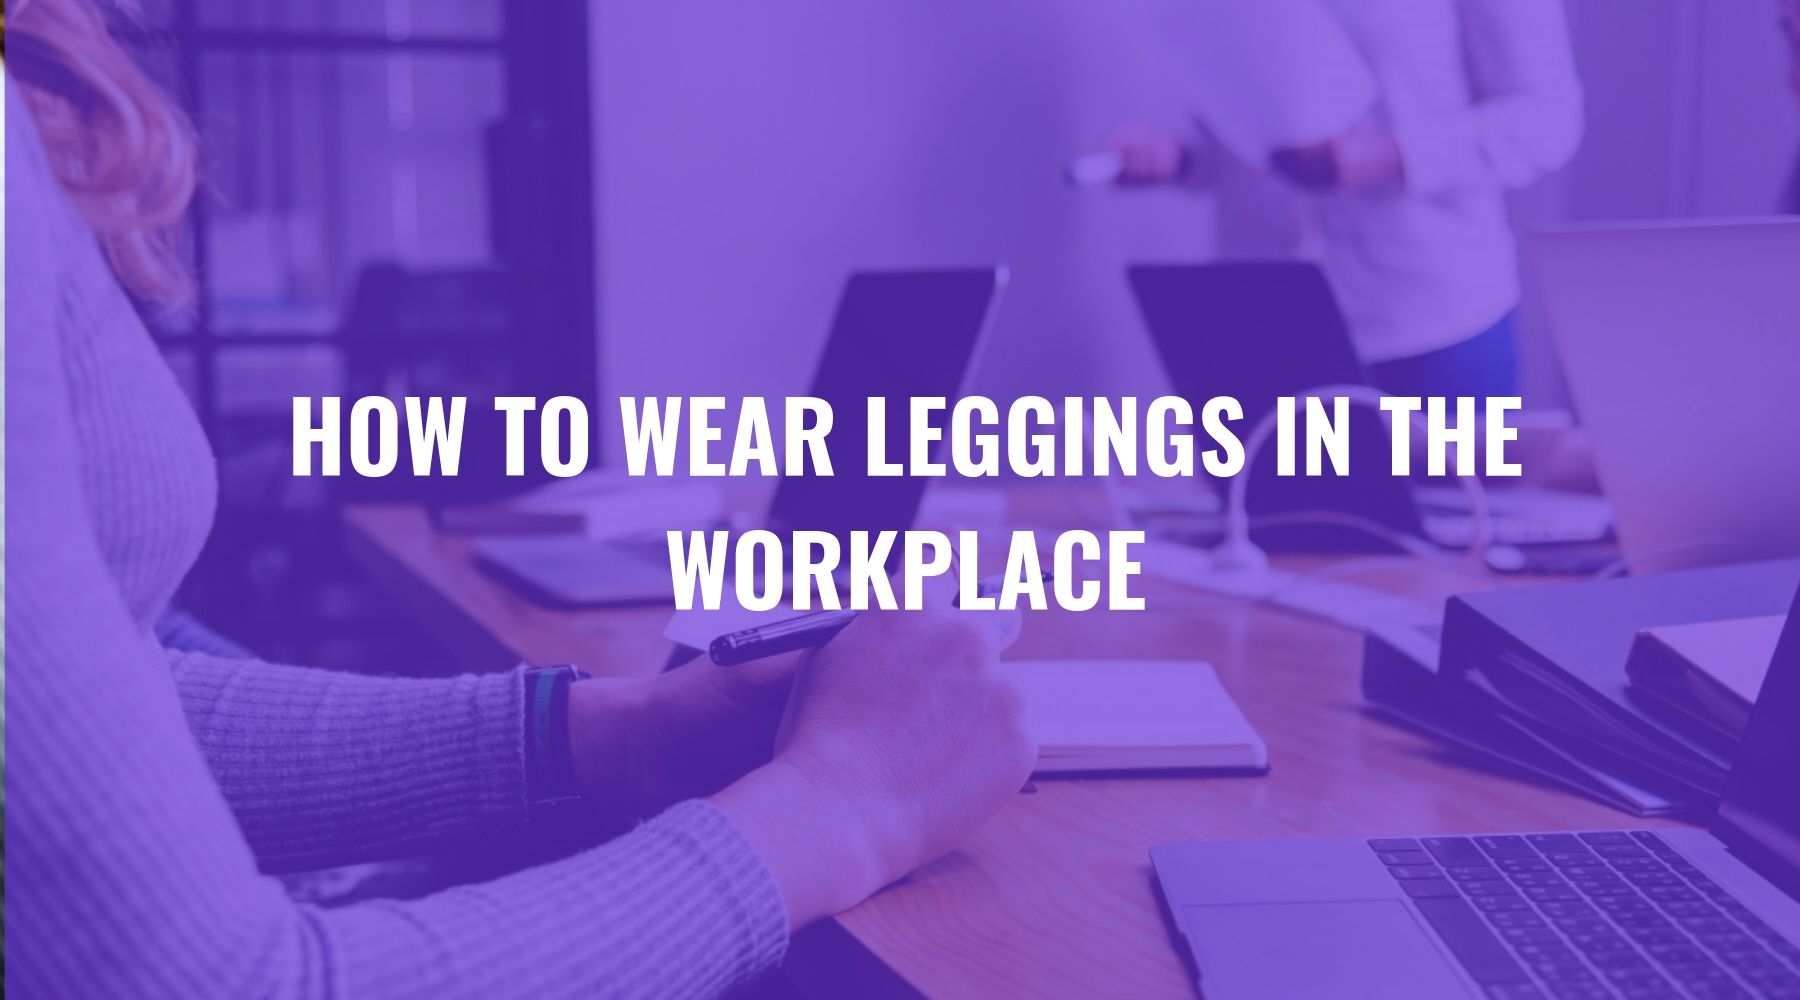 How to Wear Leggings in the Workplace